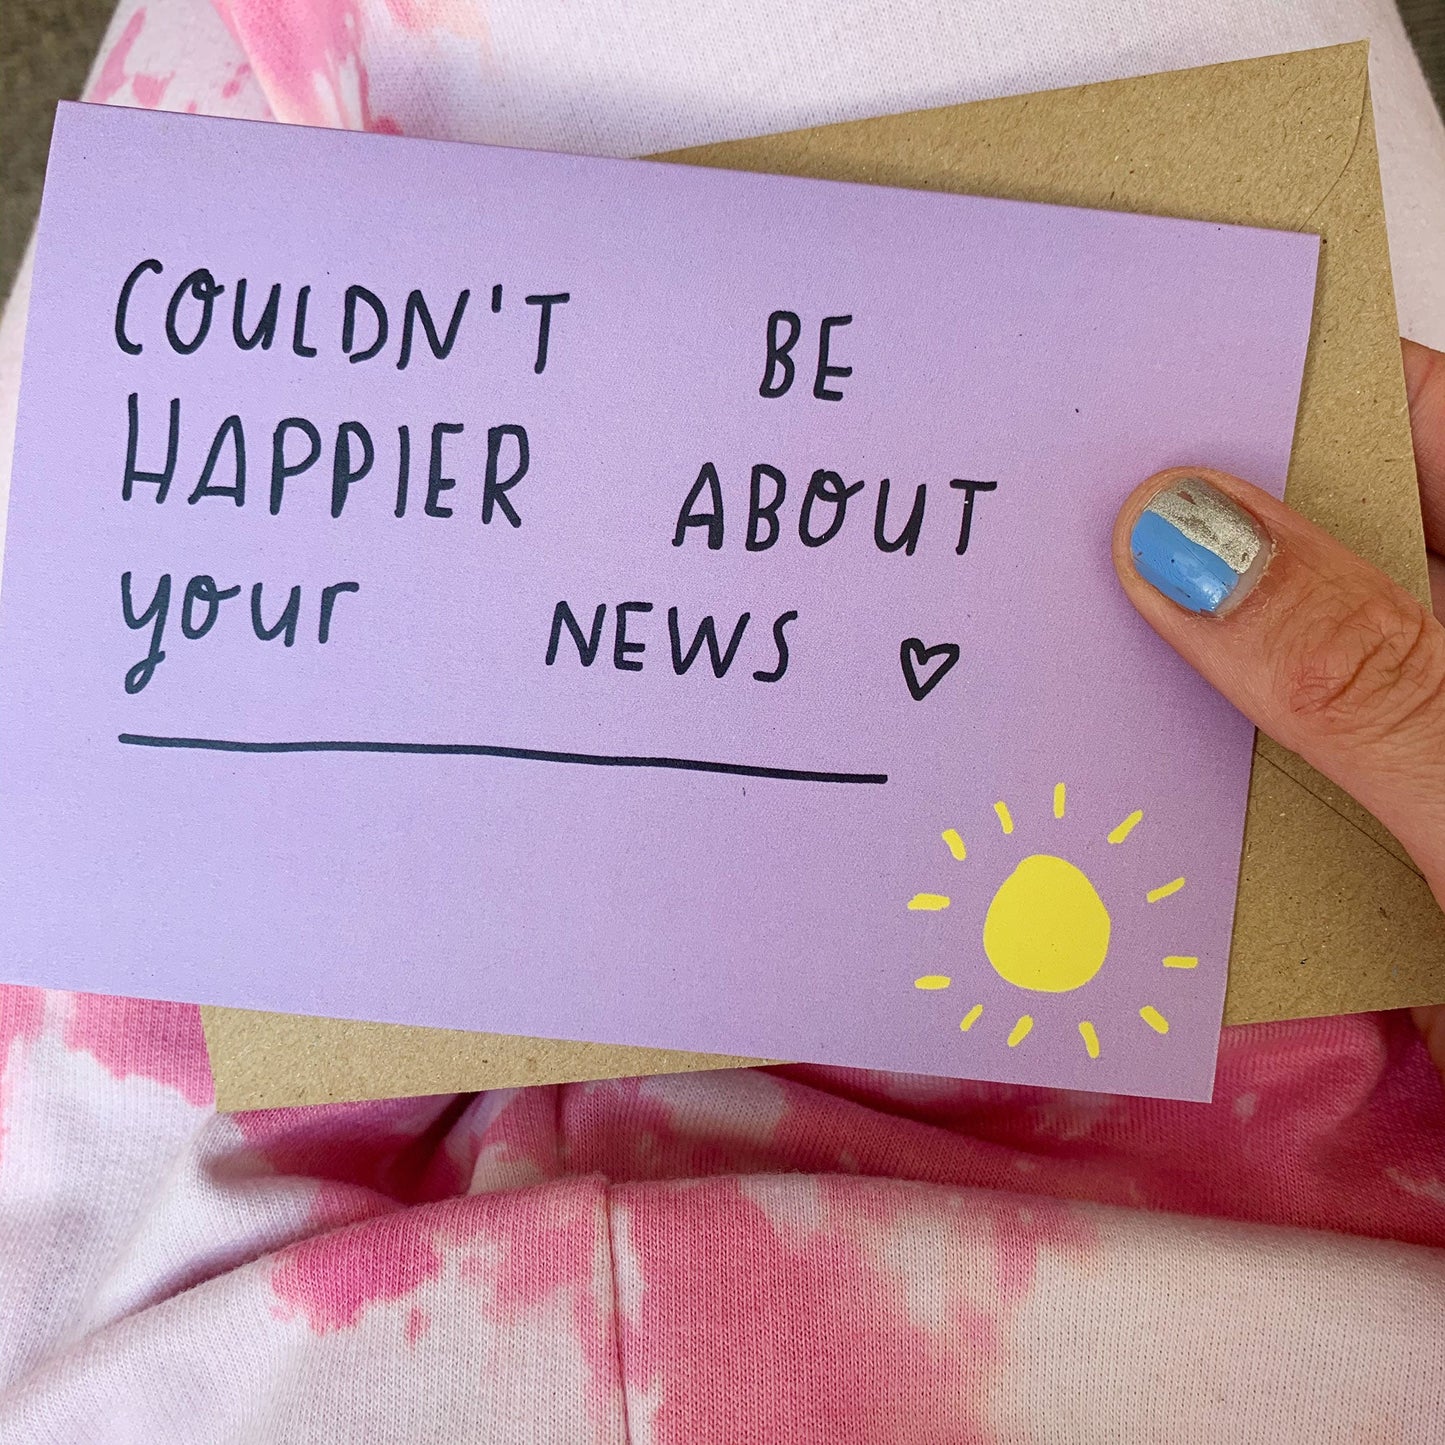 Couldn't be happier about your news card